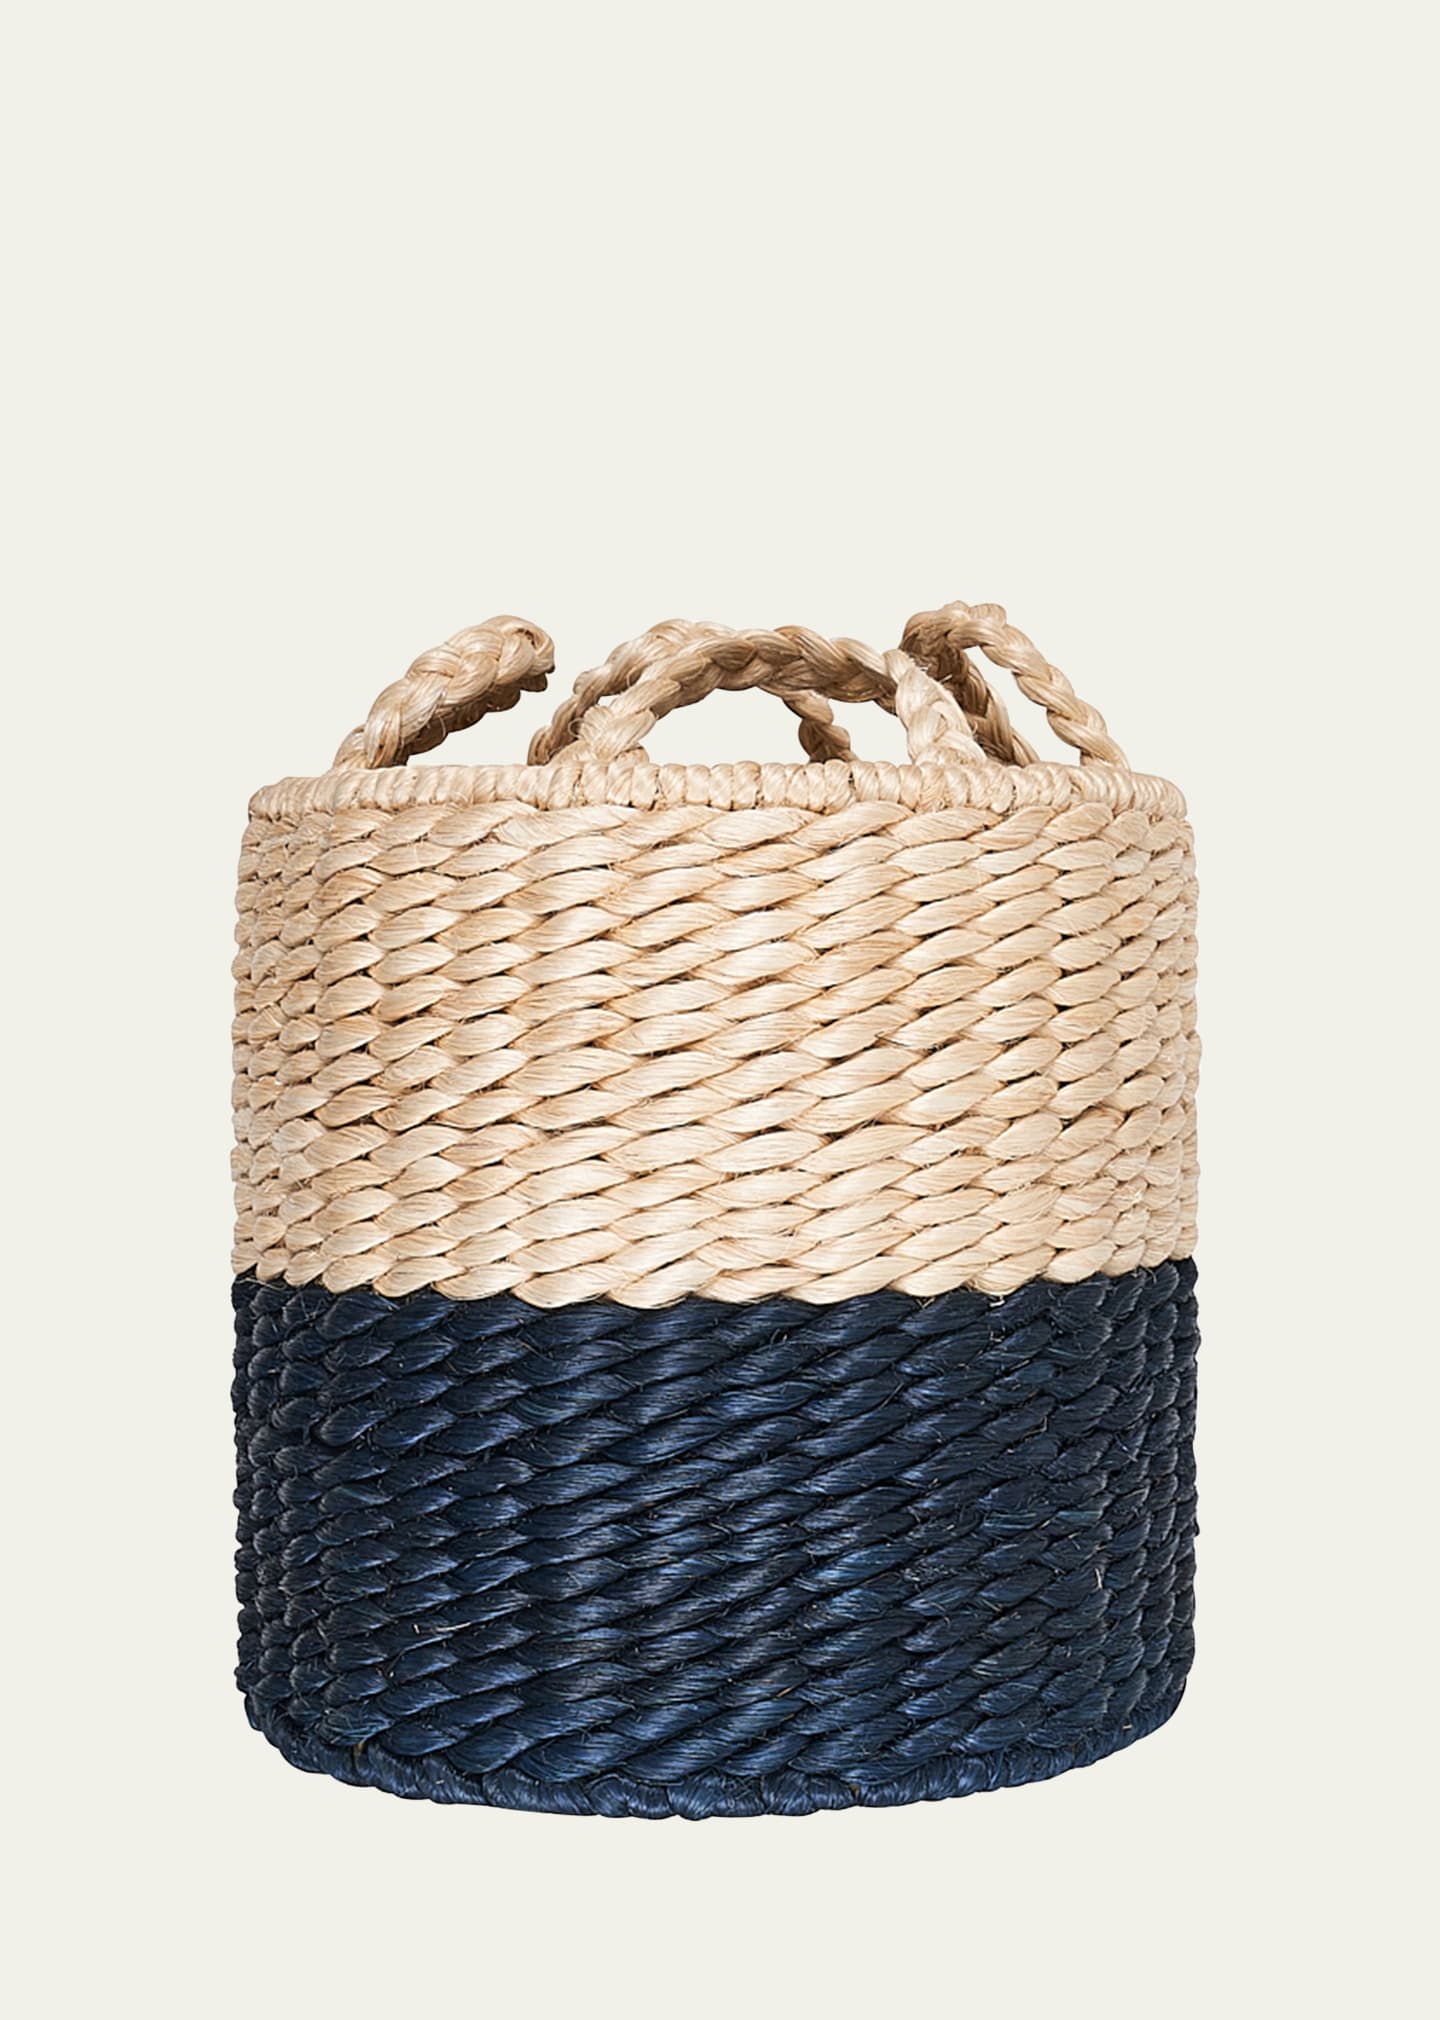 Schumacher Lubid Blue-dipped Abaca Basket, 16" In Blue Dipped